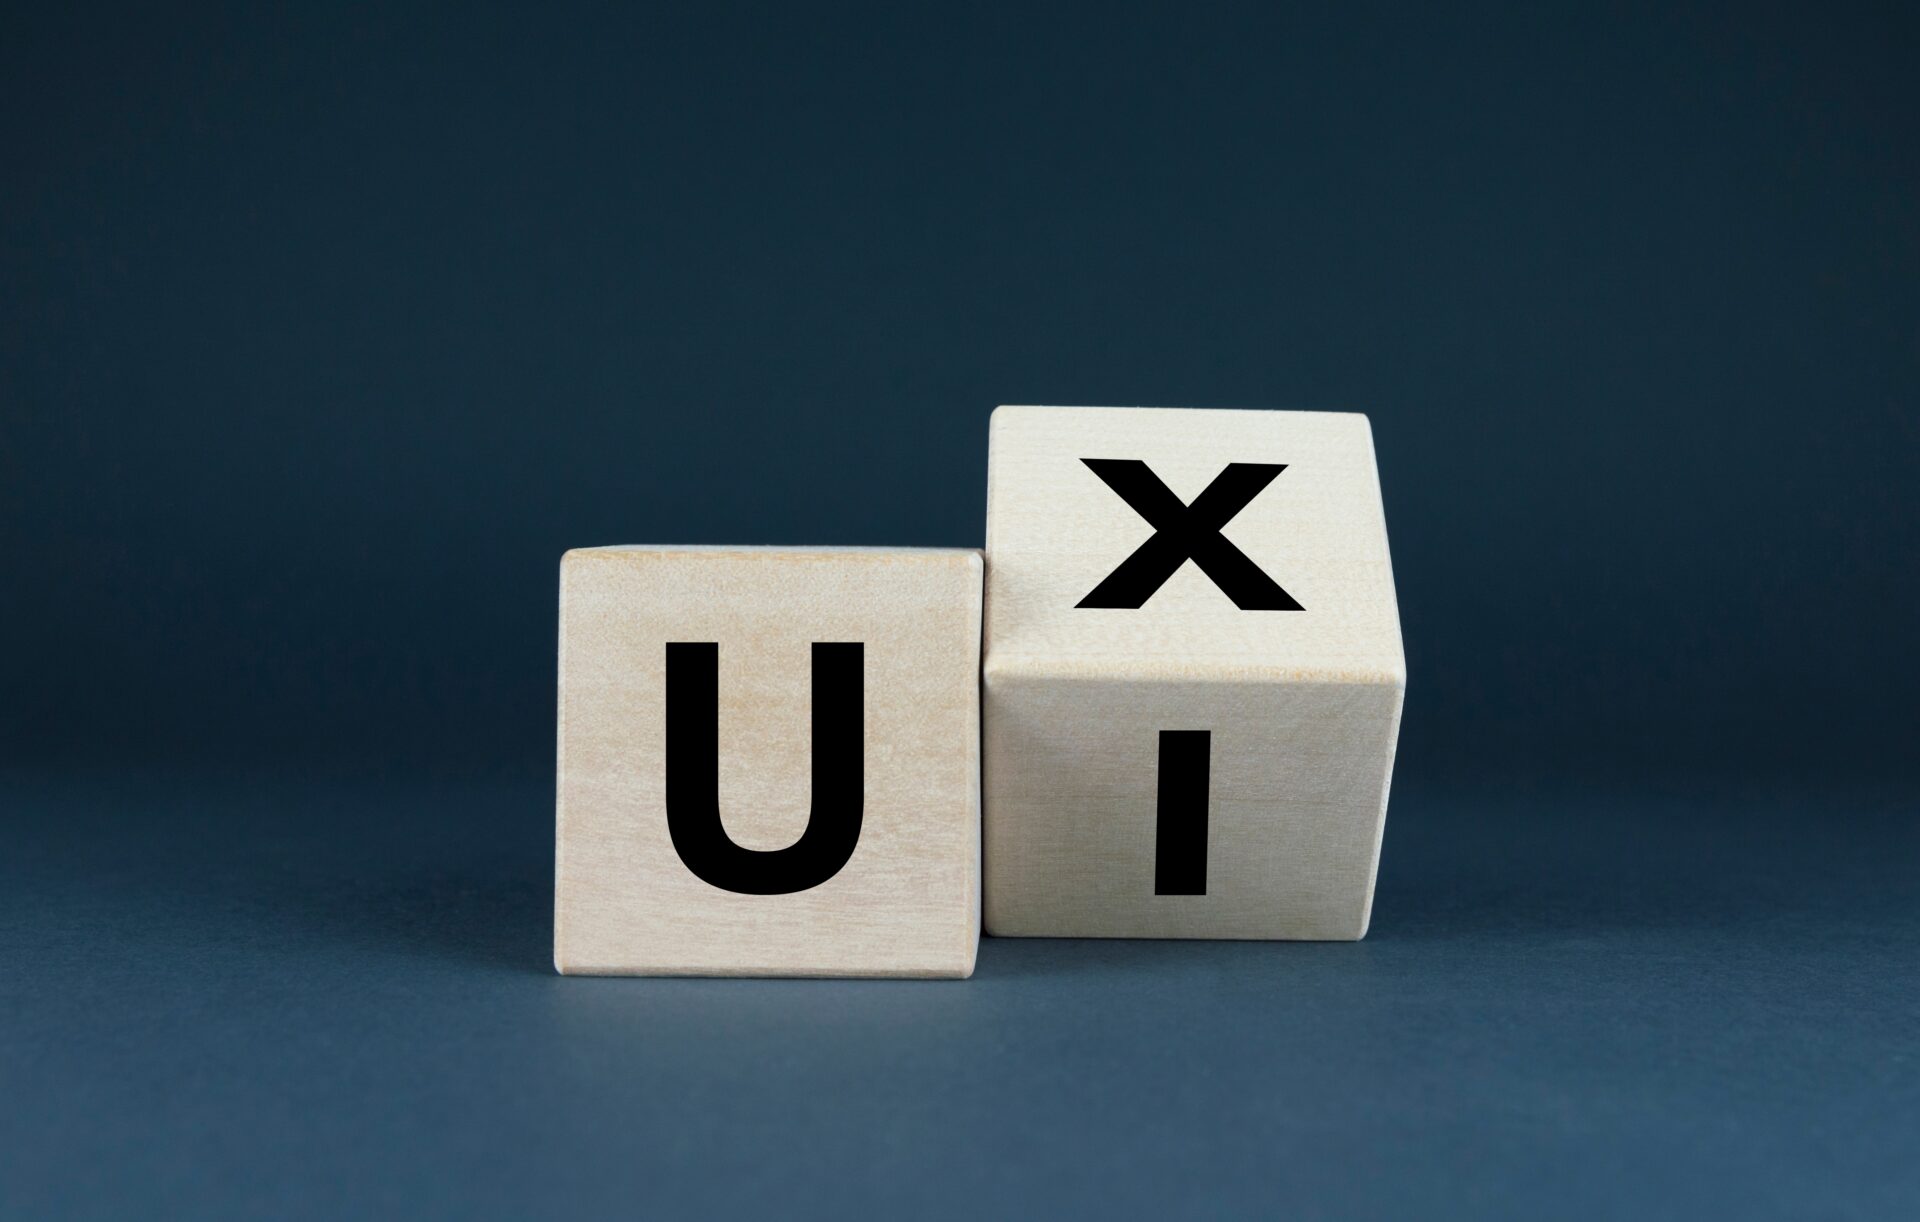 Ux,And,Ui.,The,Cubes,Form,The,Words,Ux,And